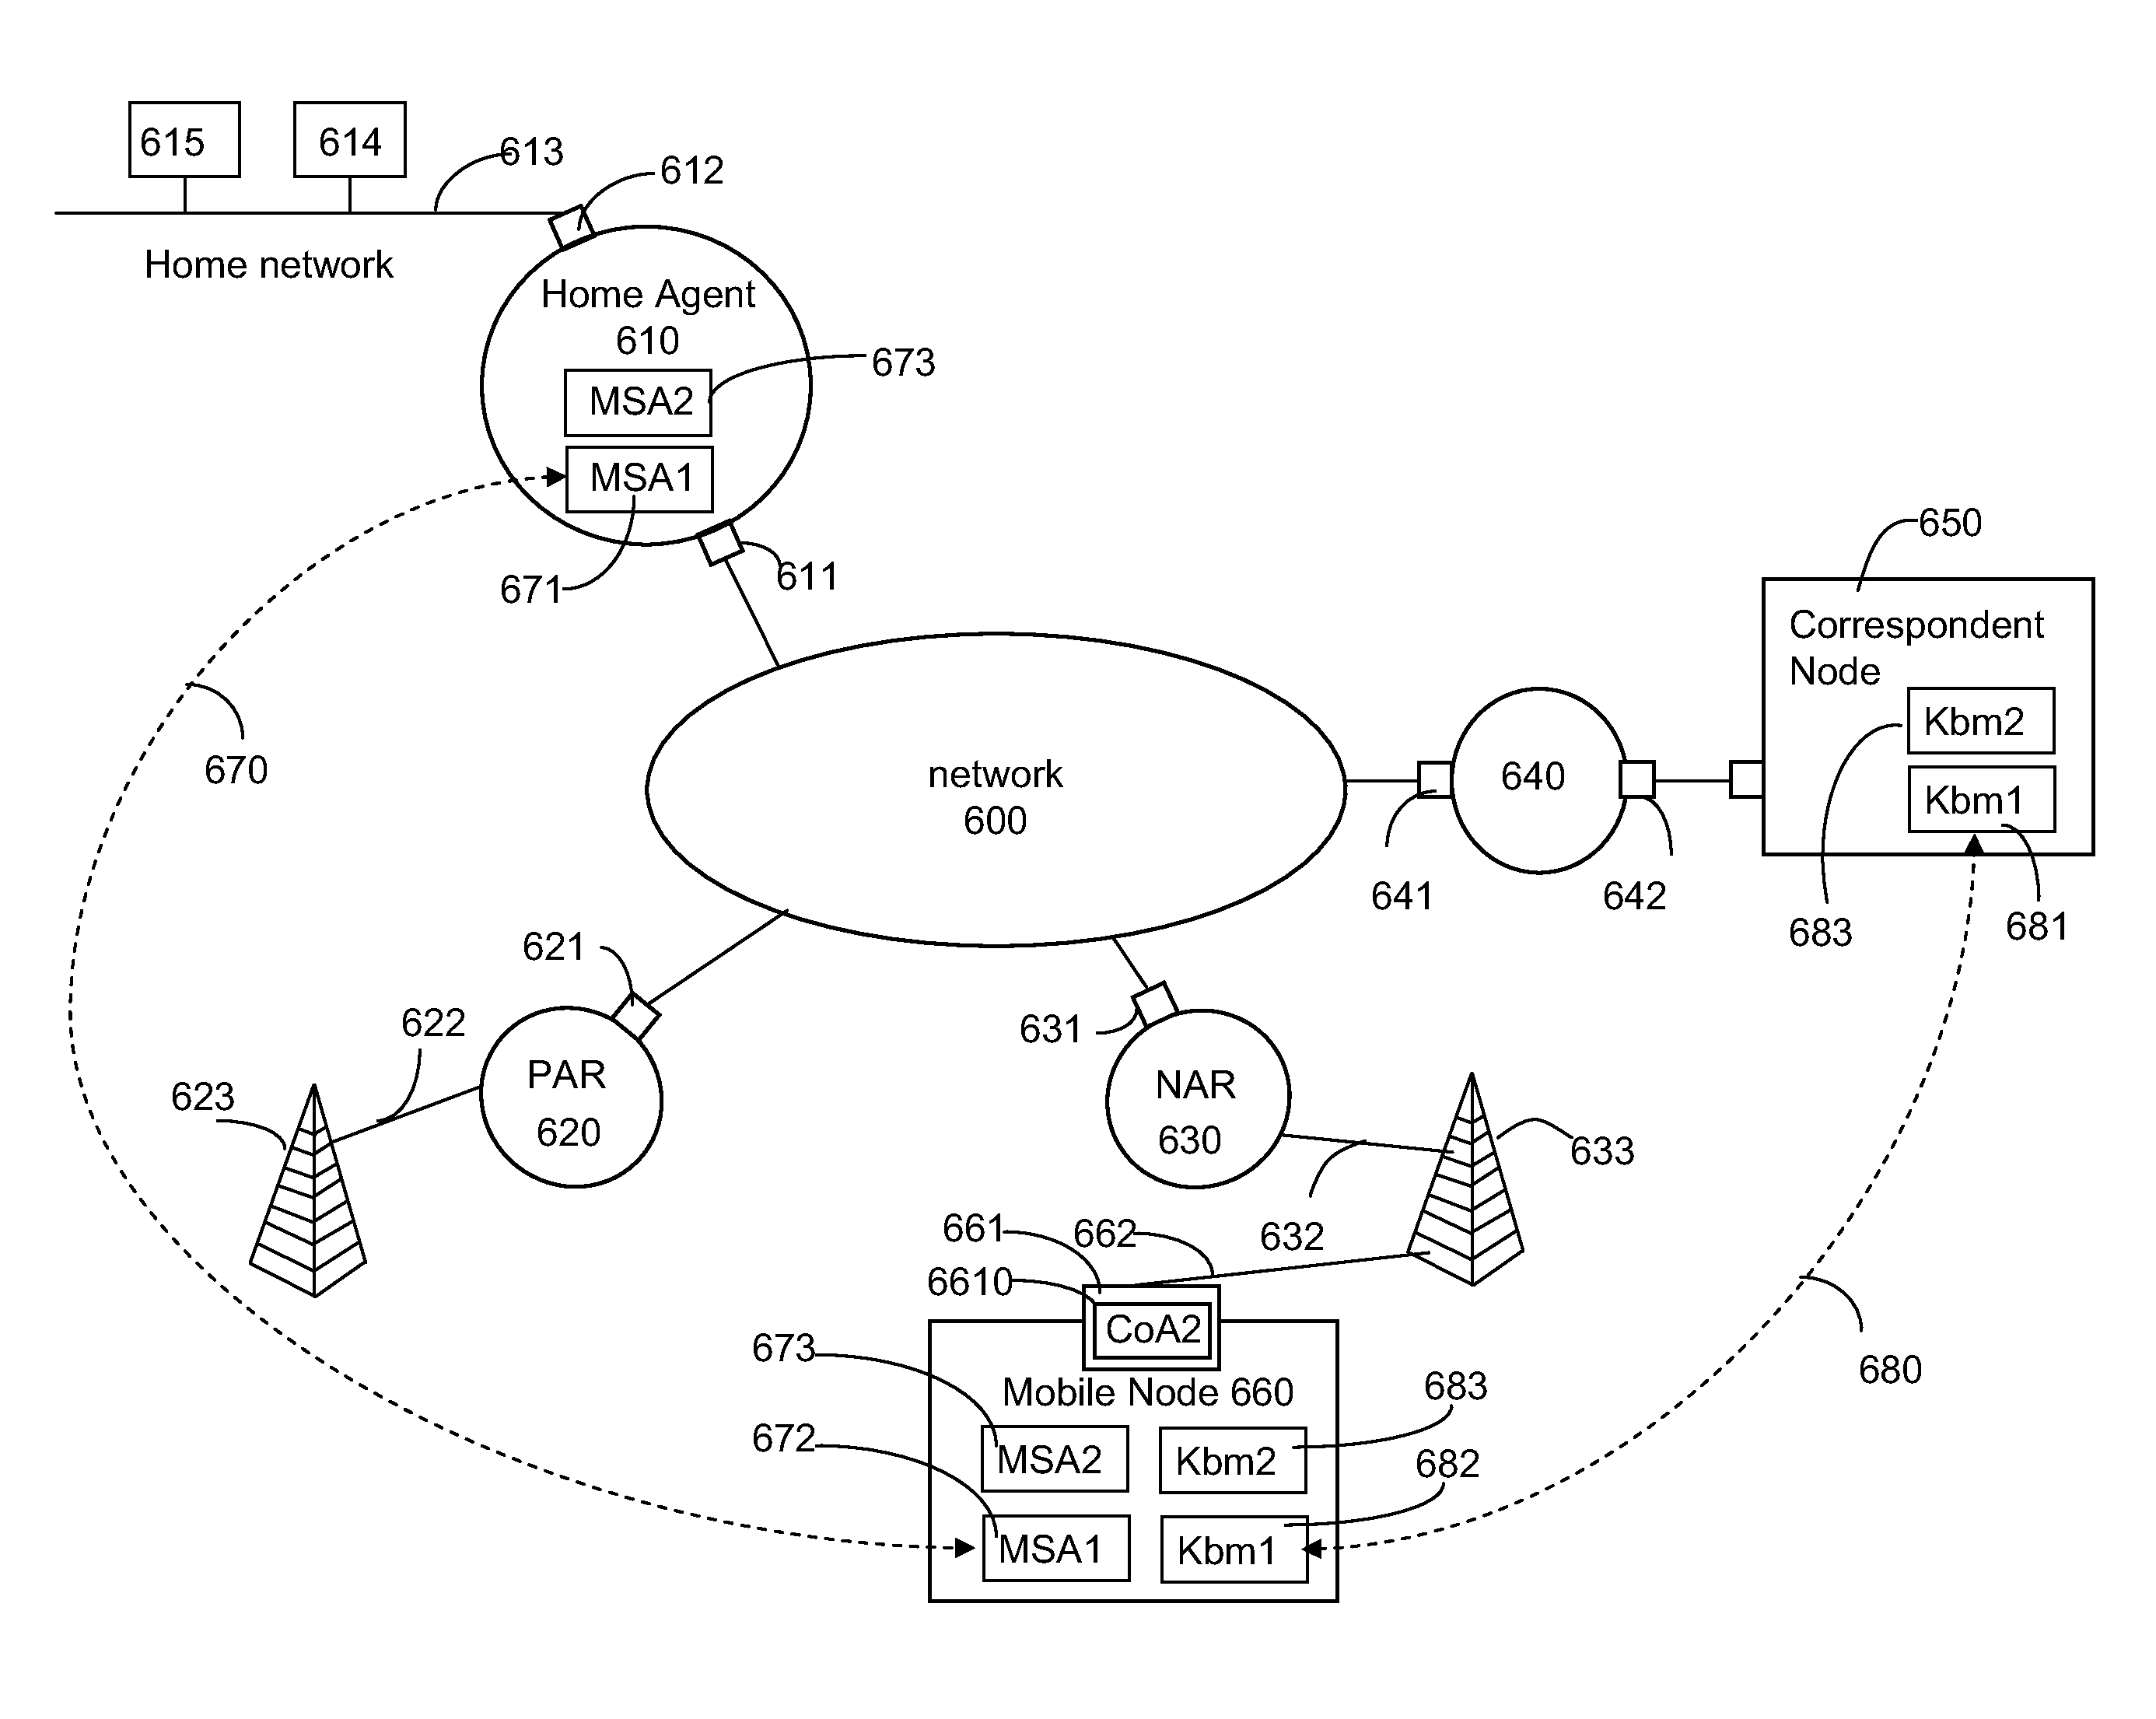 Methods and apparatus for sending data packets to and from mobile nodes in a data network